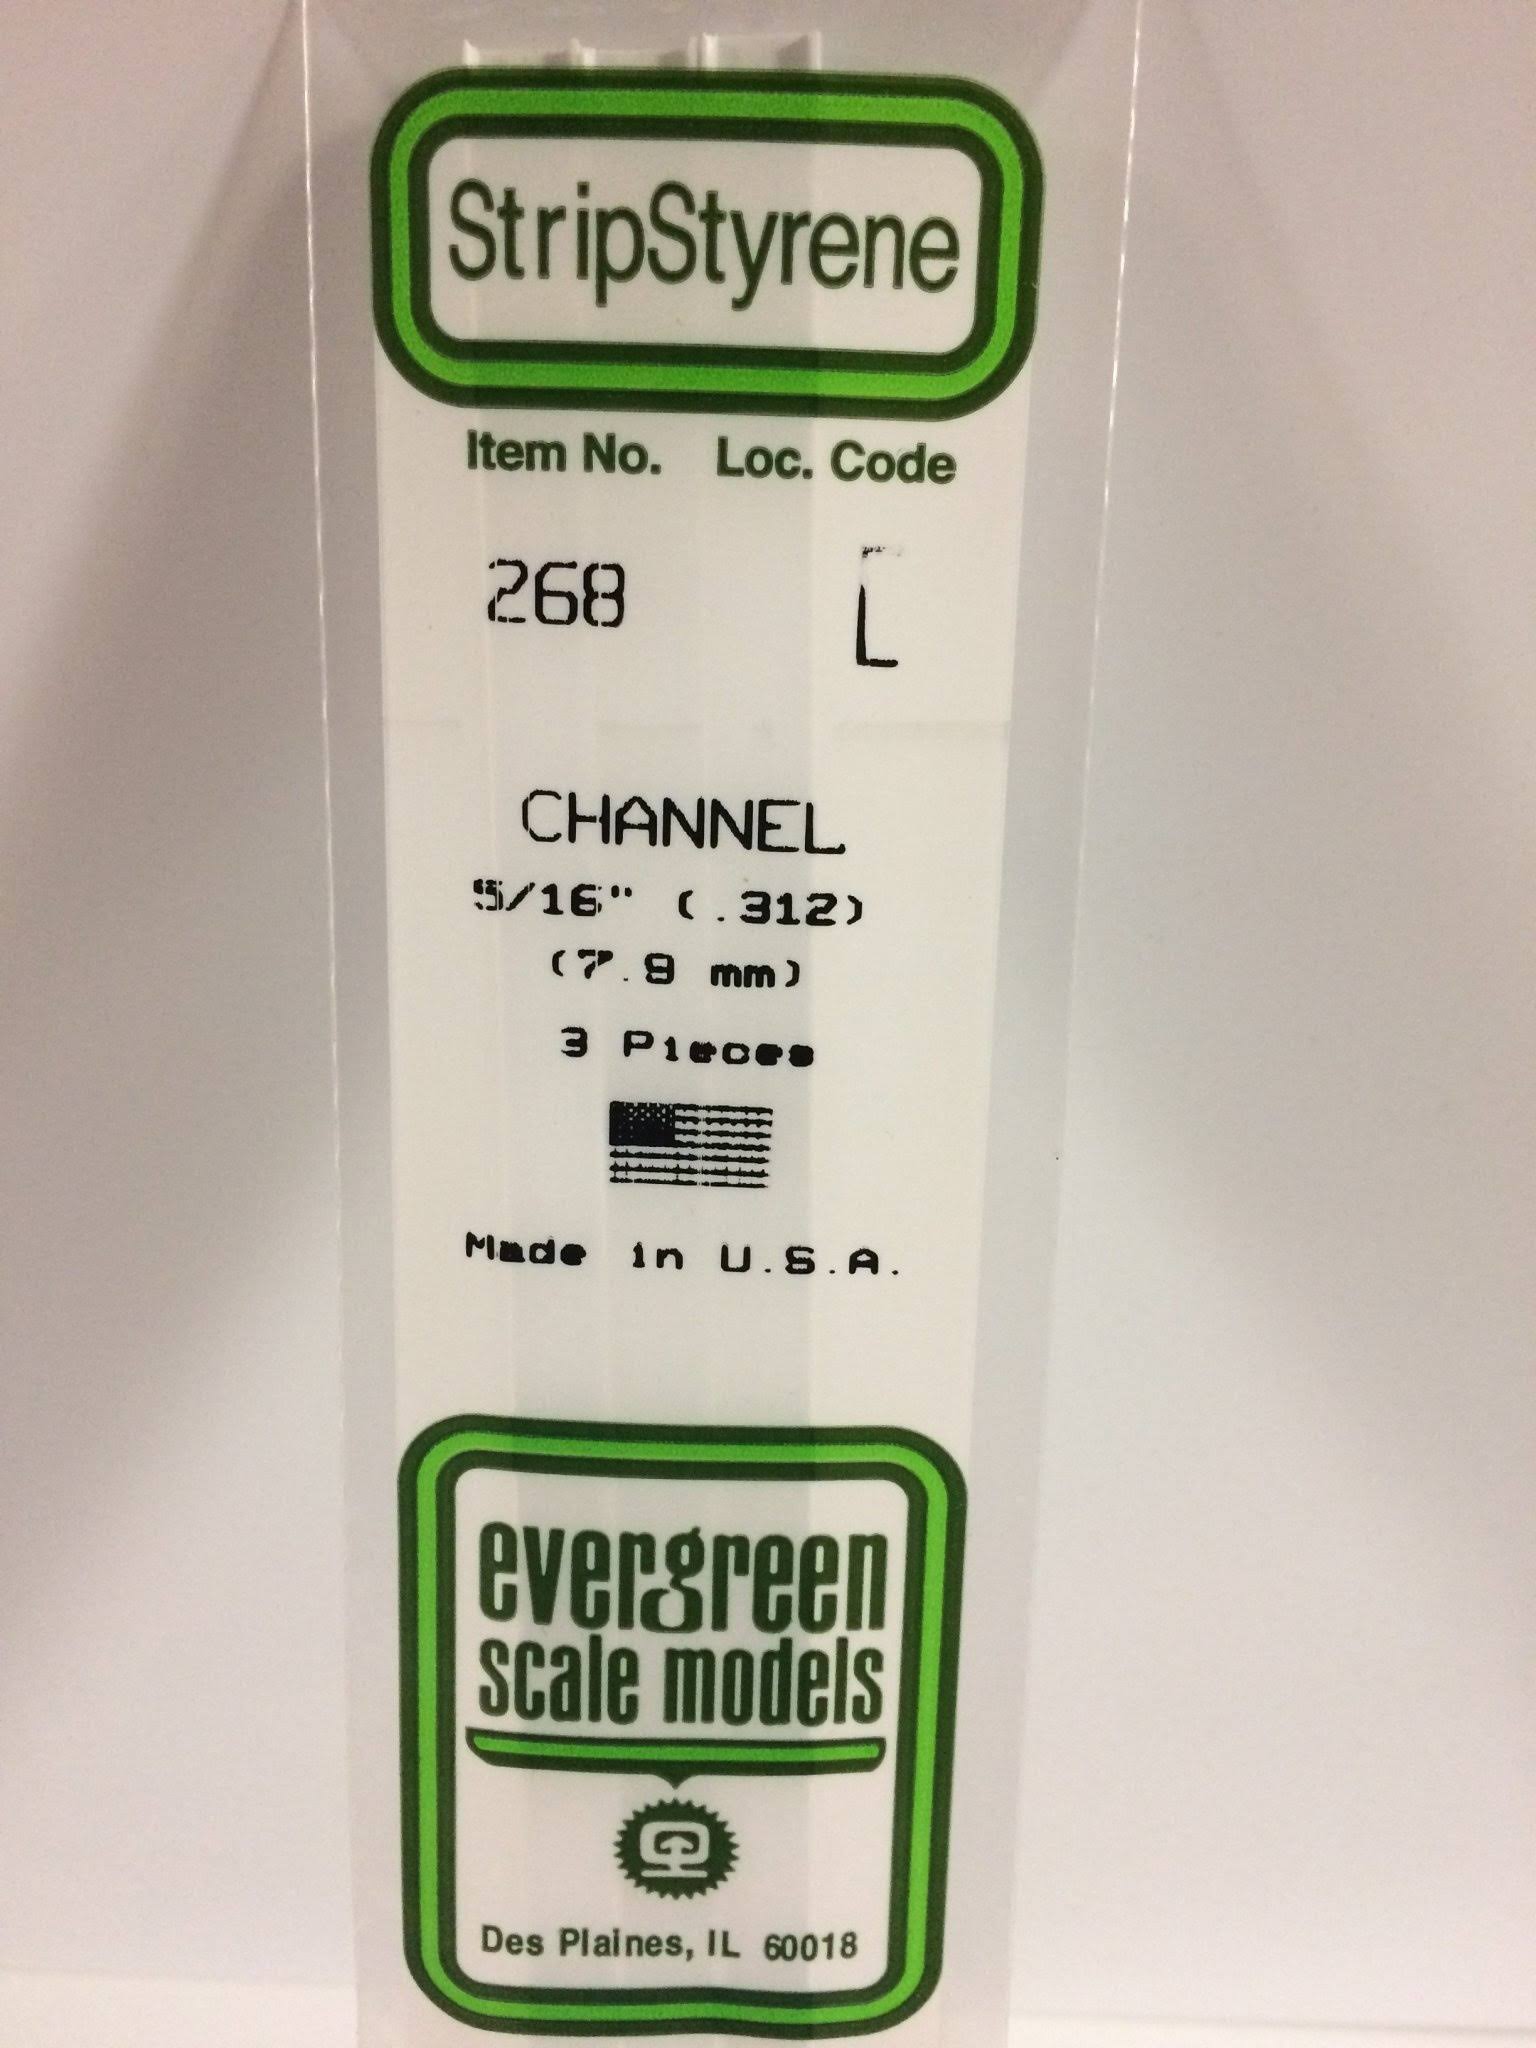 Evergreen Channel .312 7.9mm (3) 268